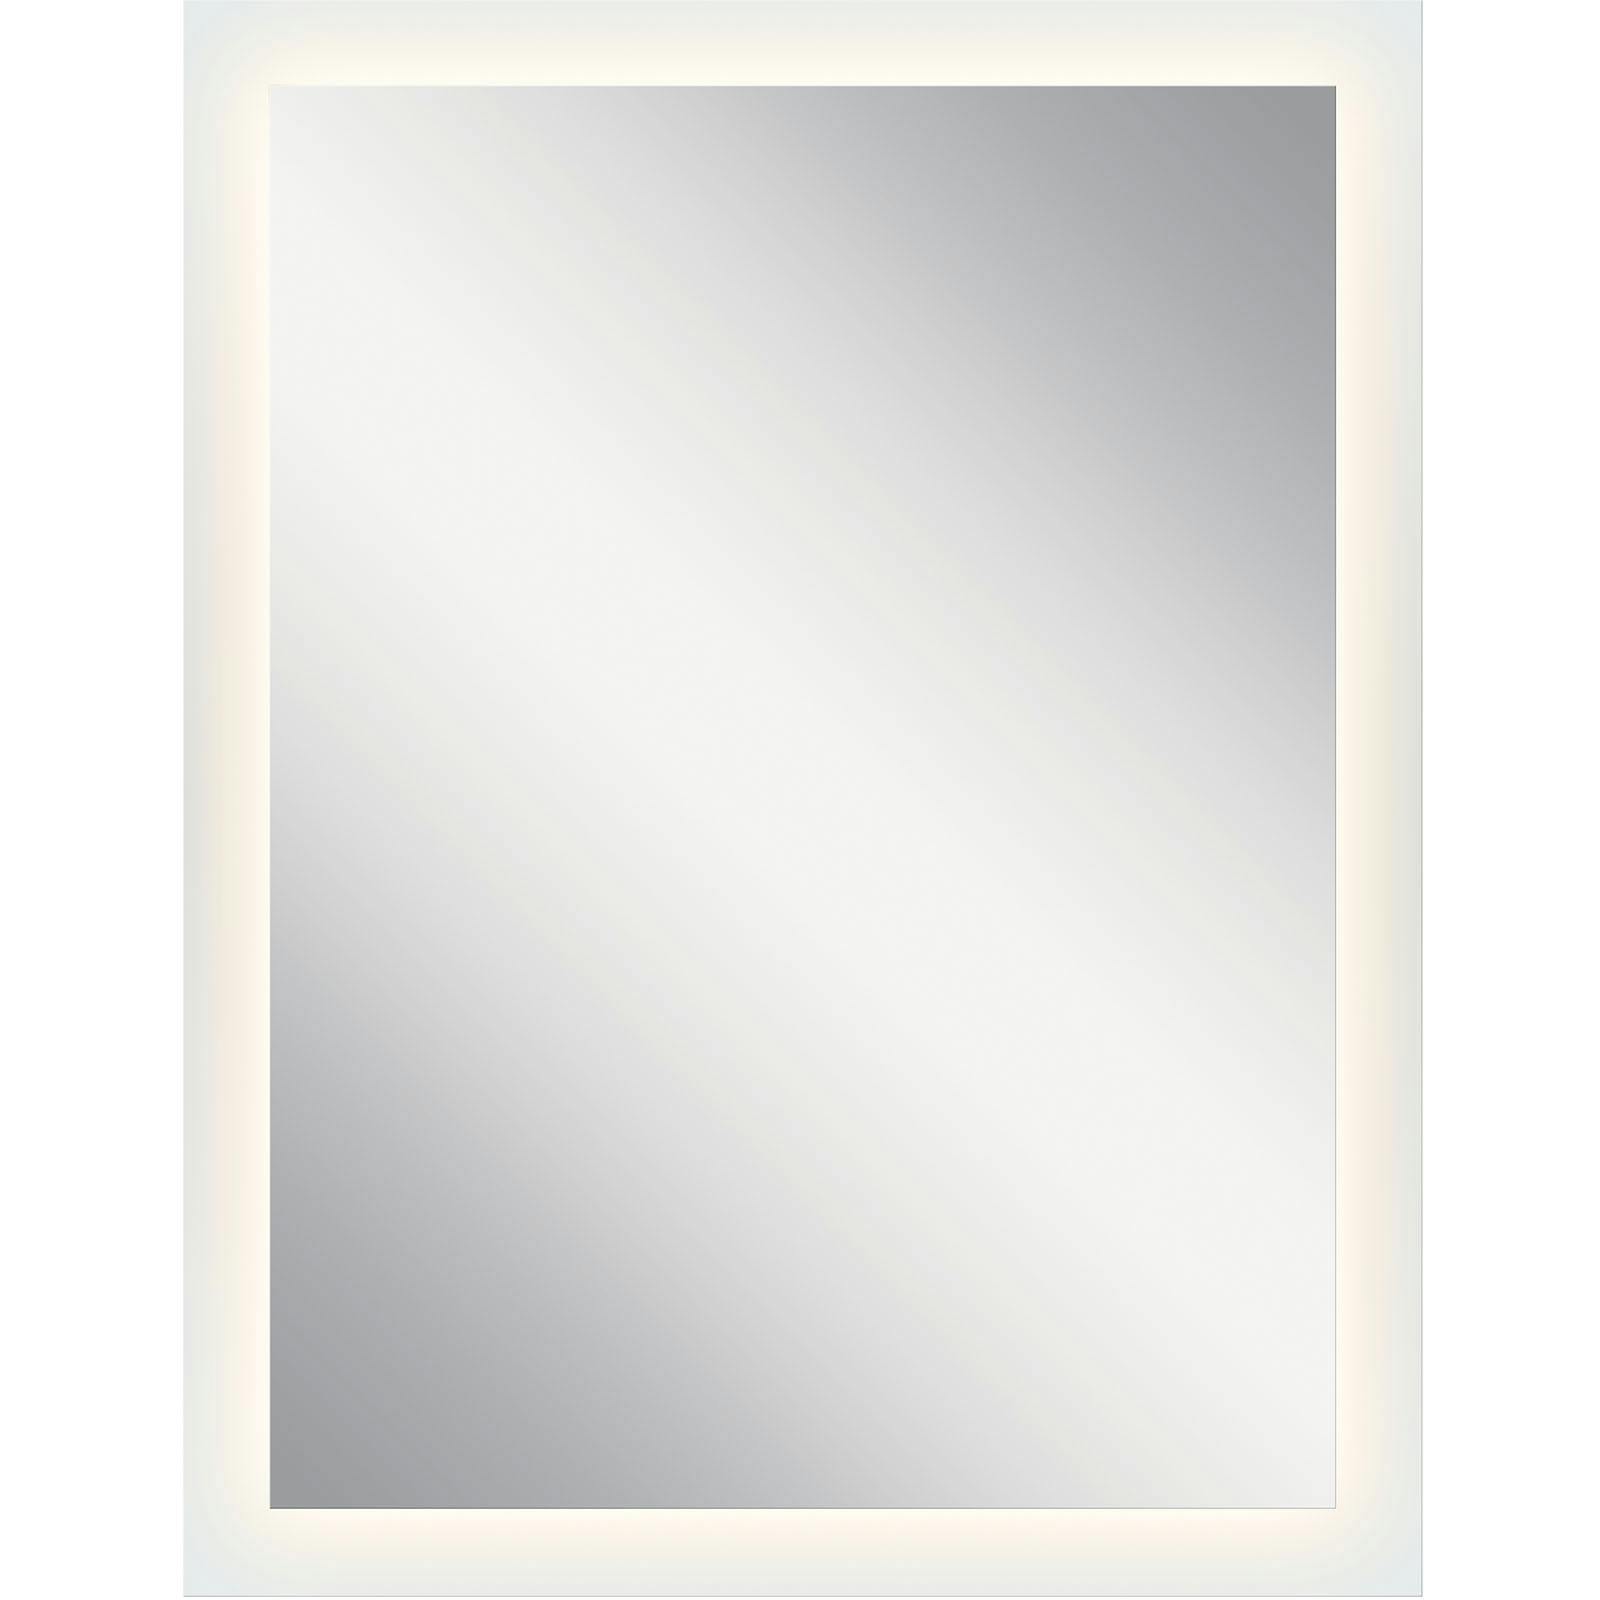 54" x 42" Rectangular LED Backlit Mirror hung vertically on a white background